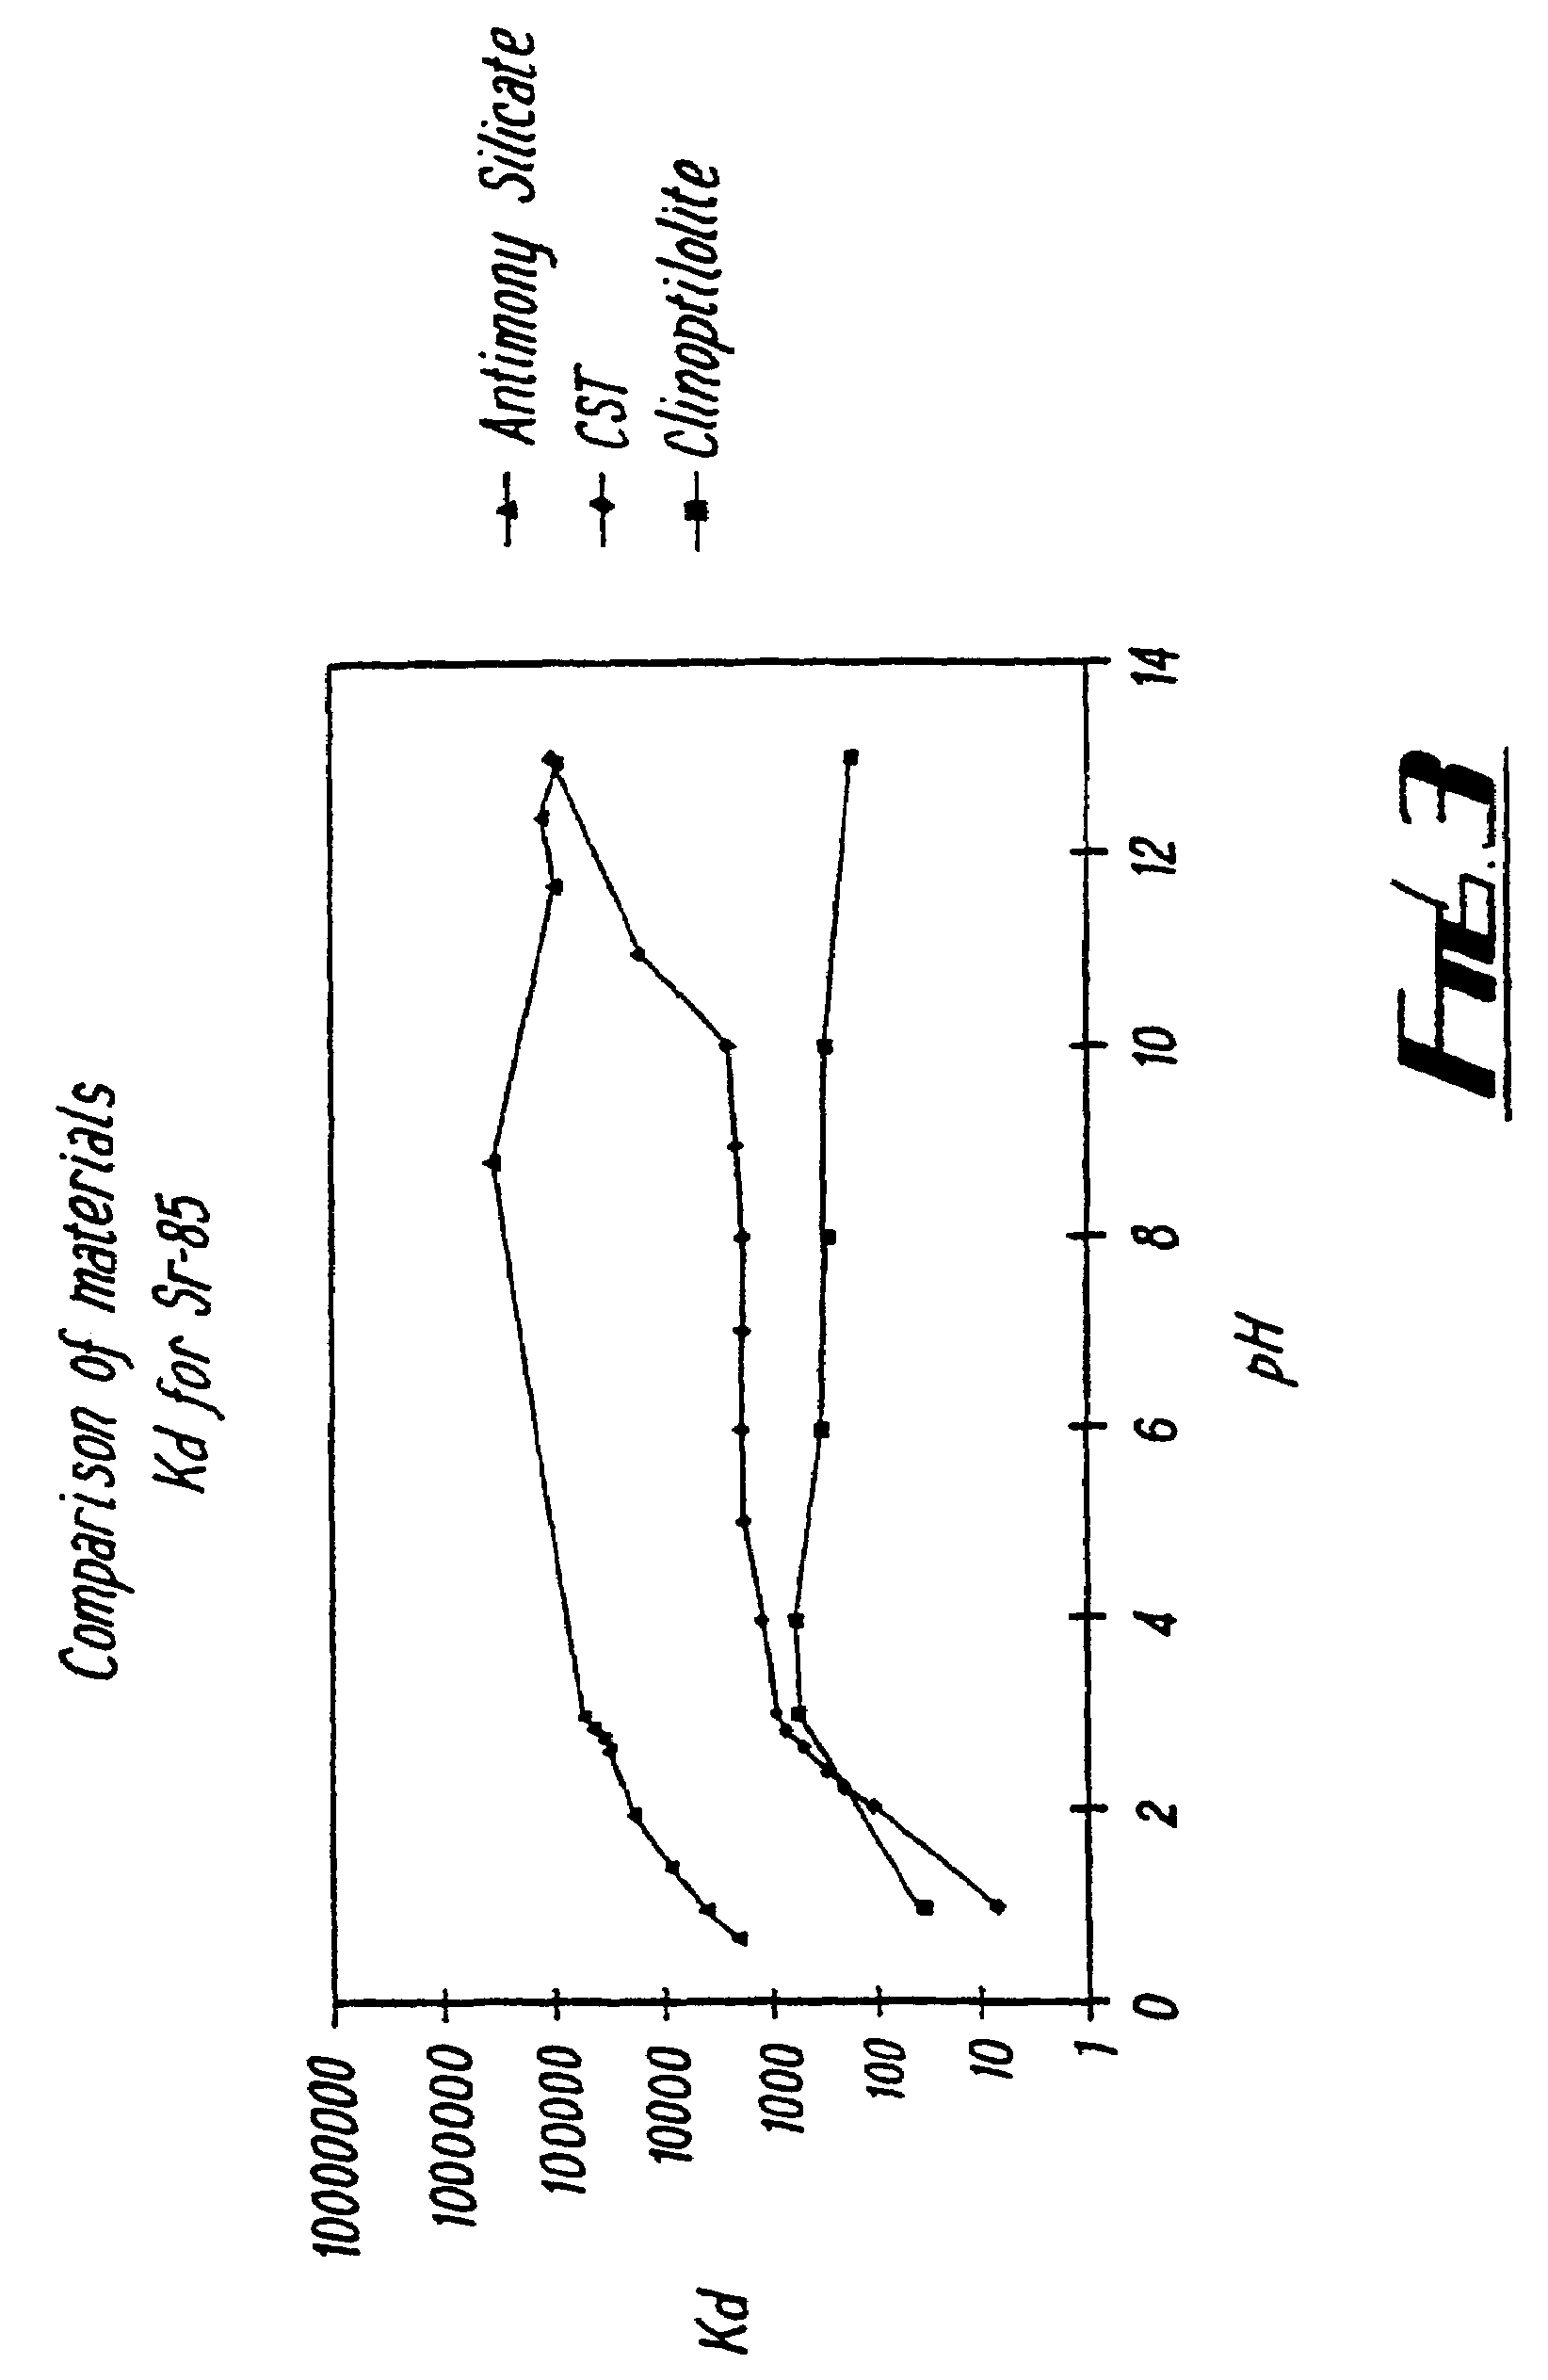 Method of extracting metal ions from an aqueous solution utilizing an antimony silicate sorbent